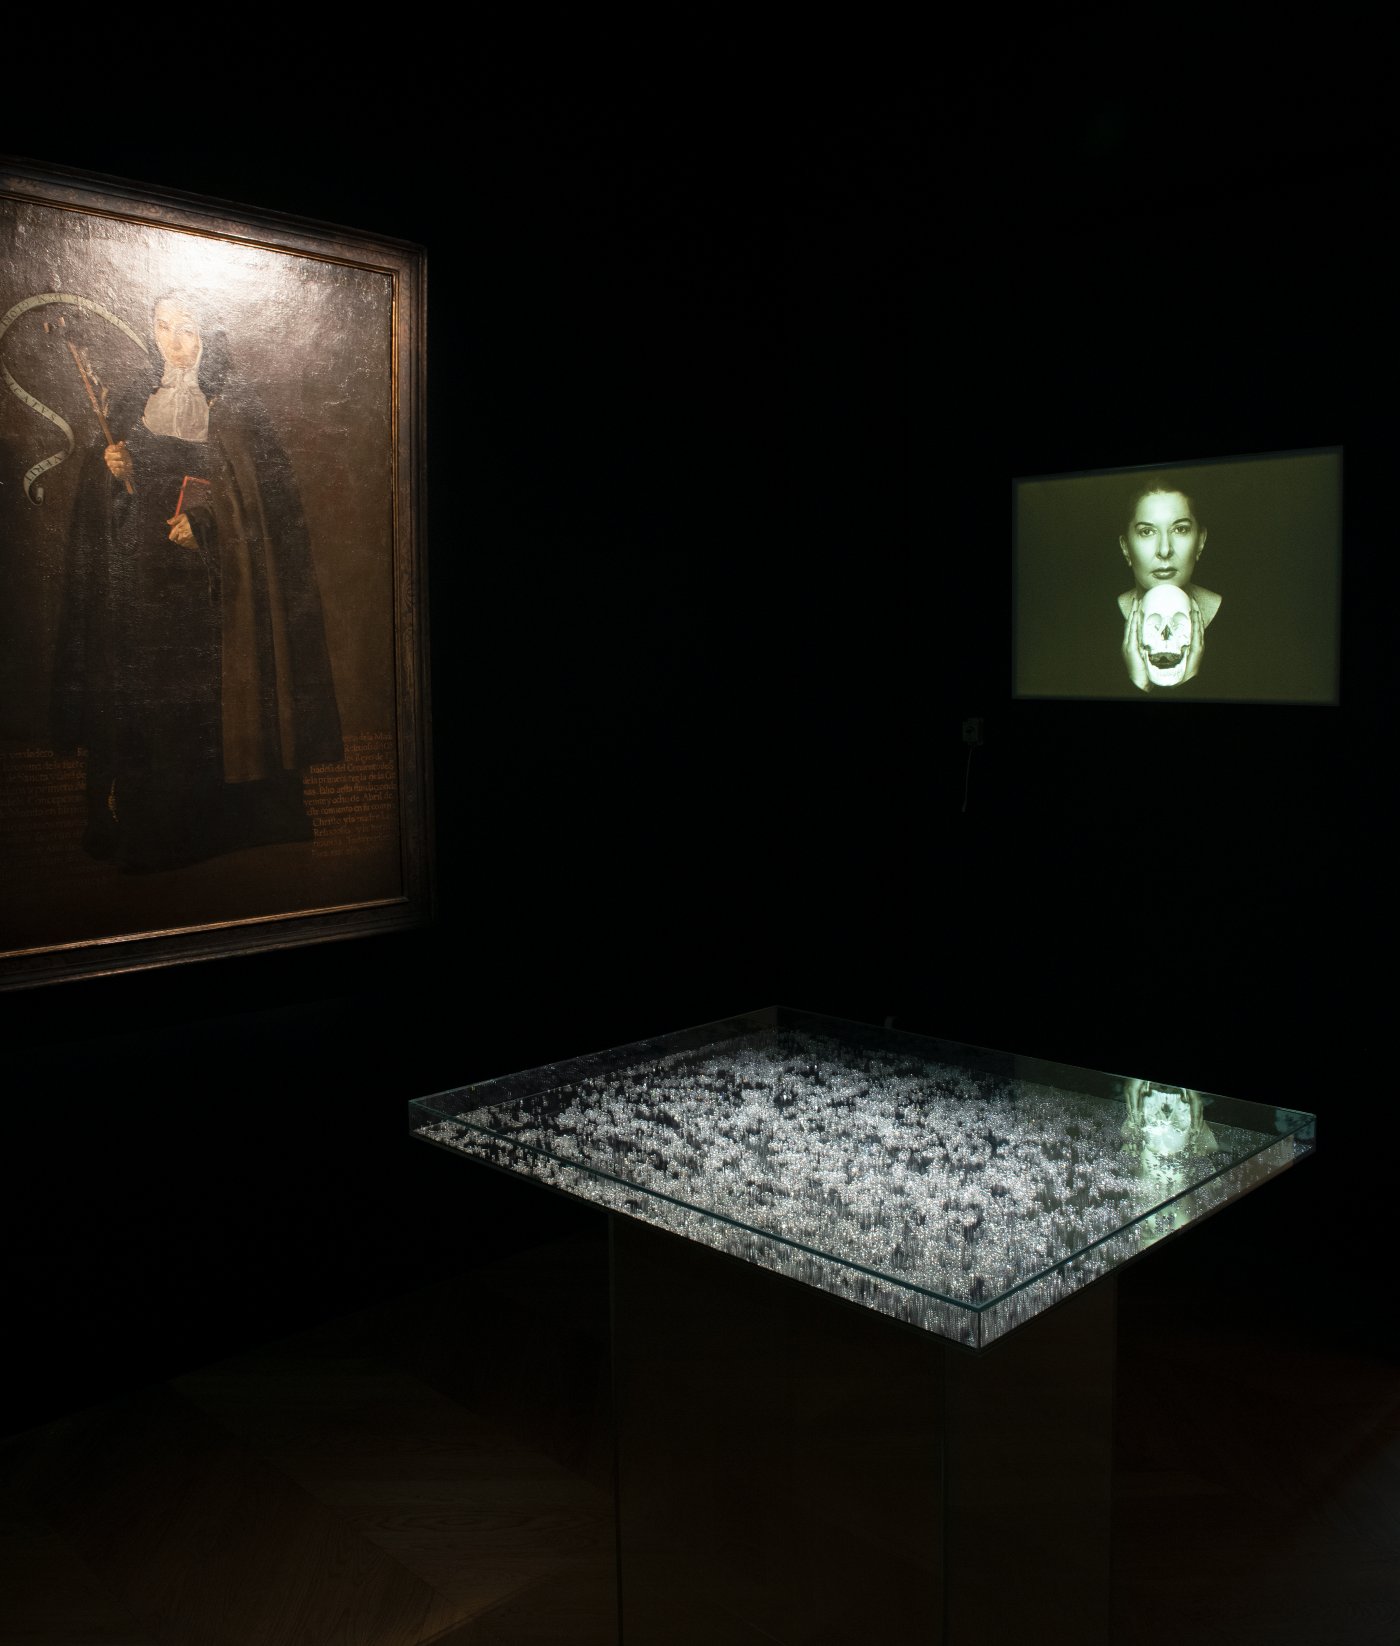 Installation image for Humble Works, at Colnaghi